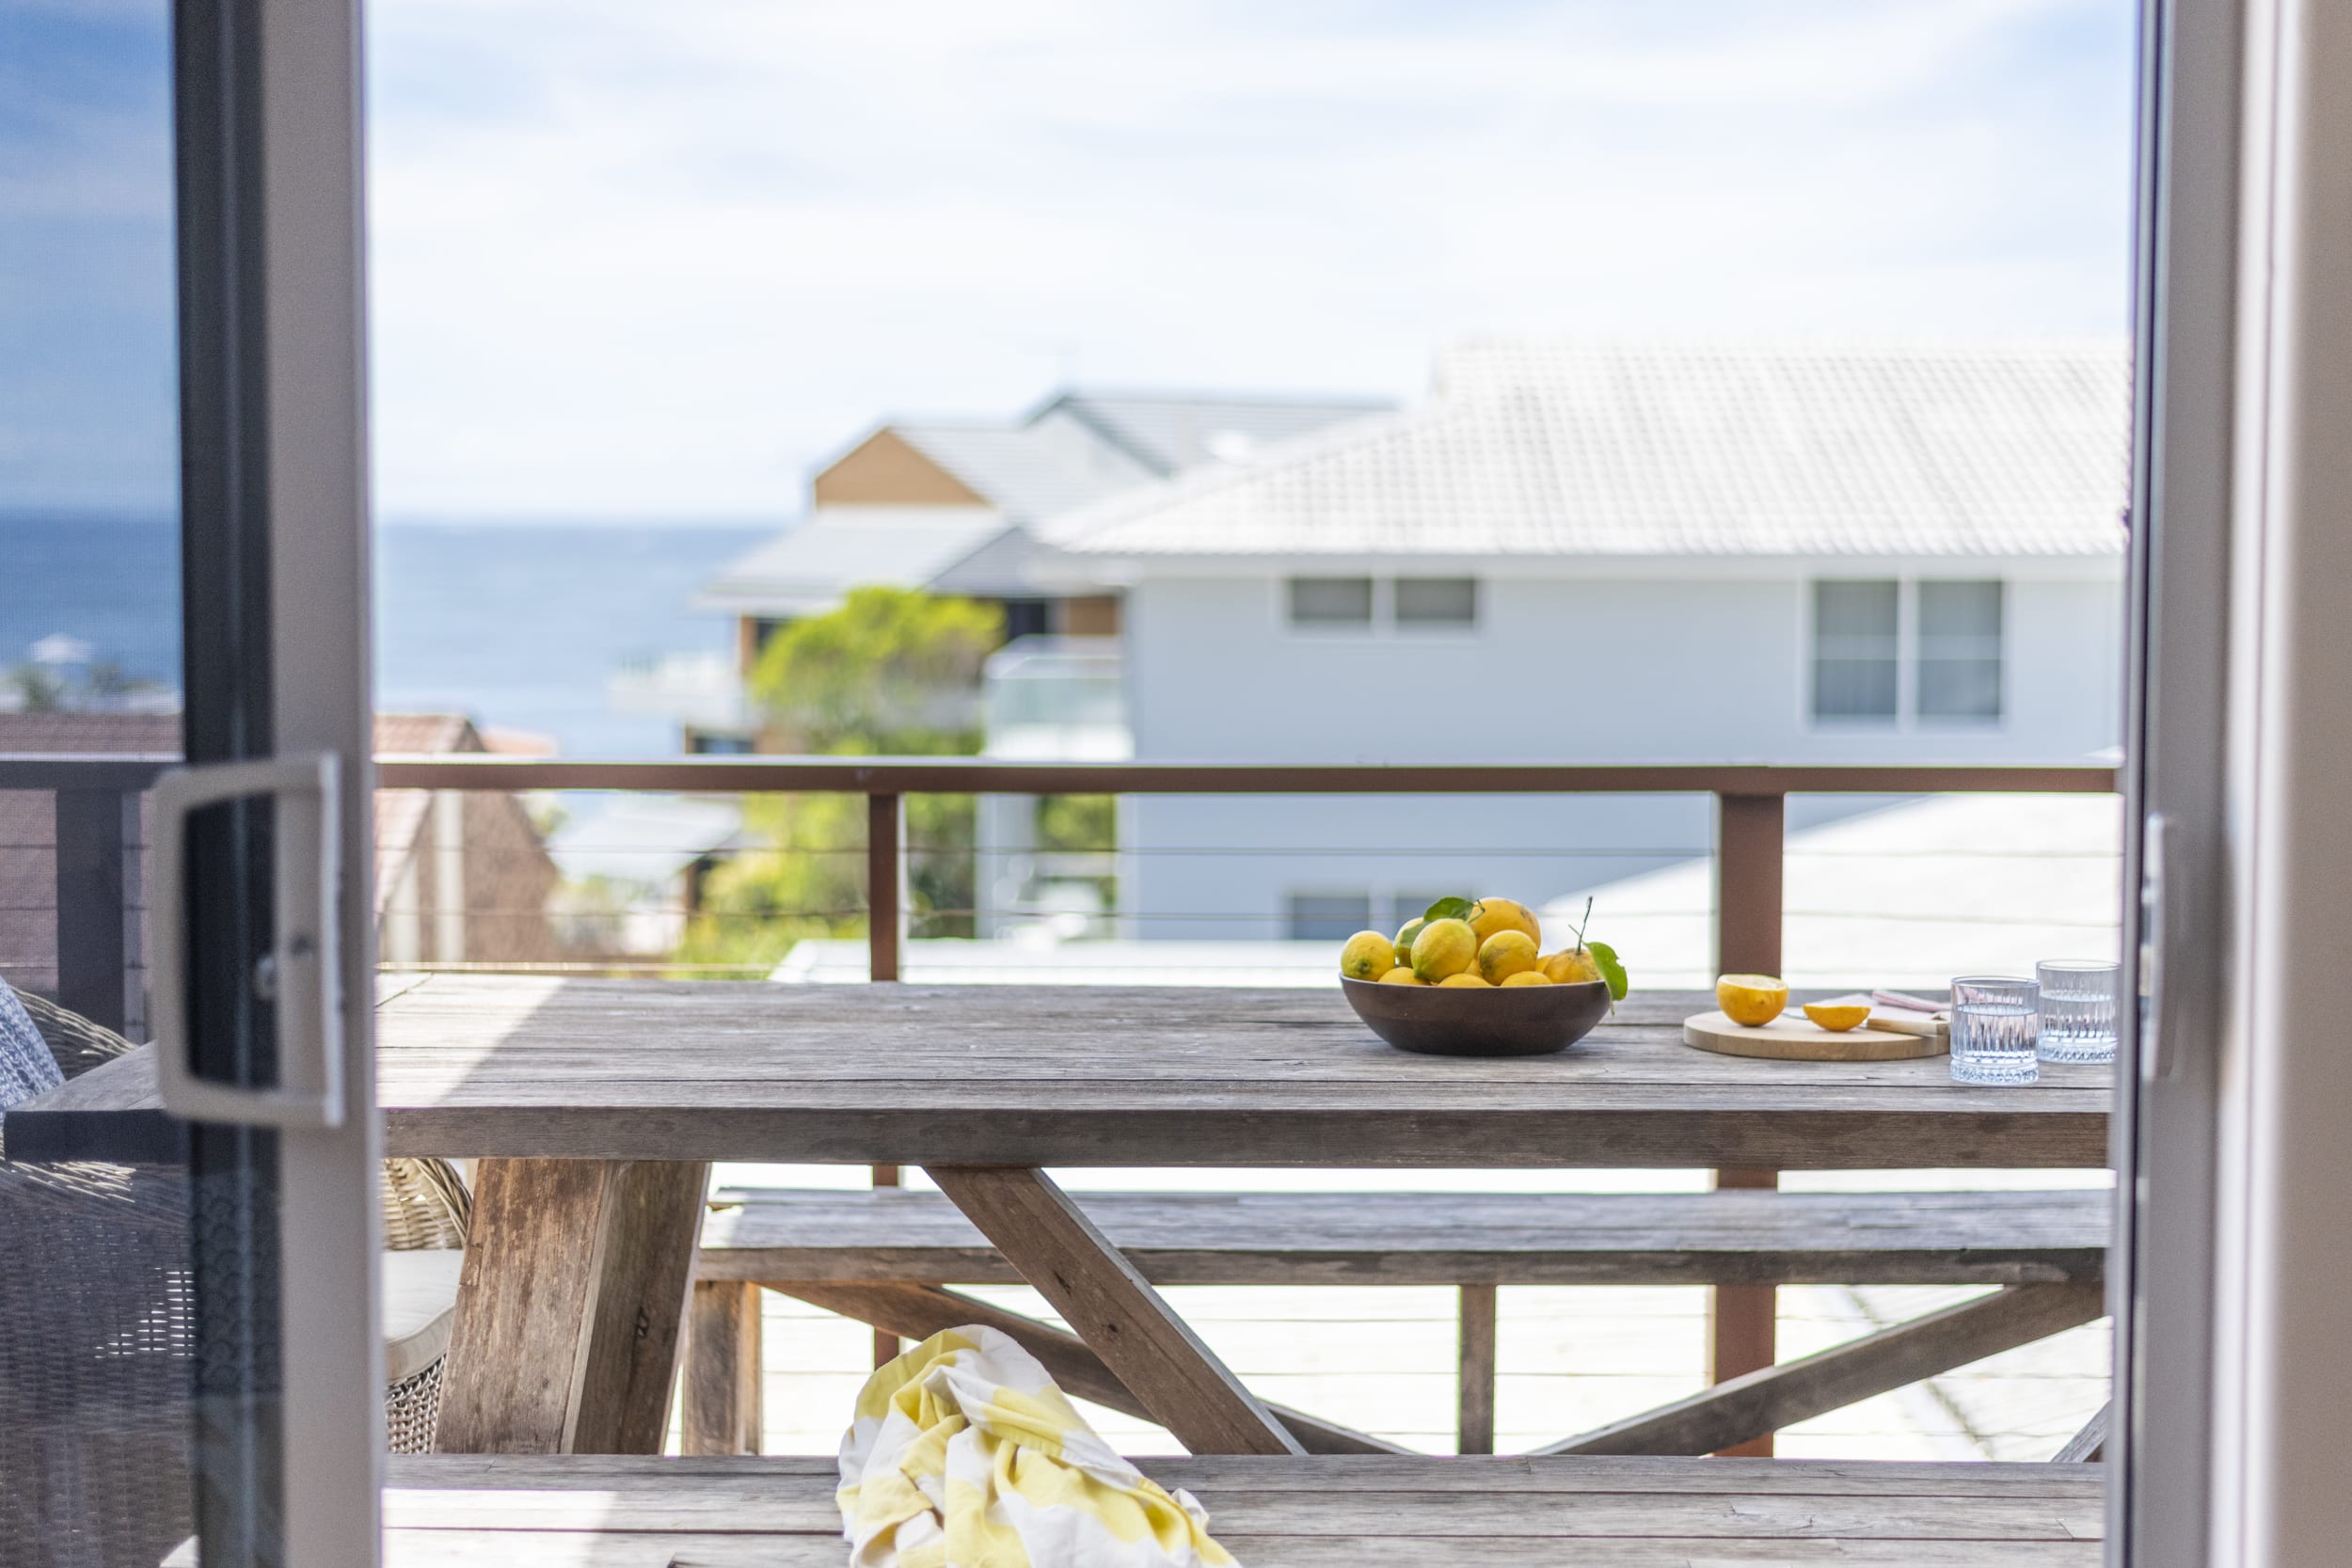 Bimbajong Main Beach - Coast accommodation in Yamba town with Ocean views - Upstairs rear balcony with outdoor dining setting and ocean views